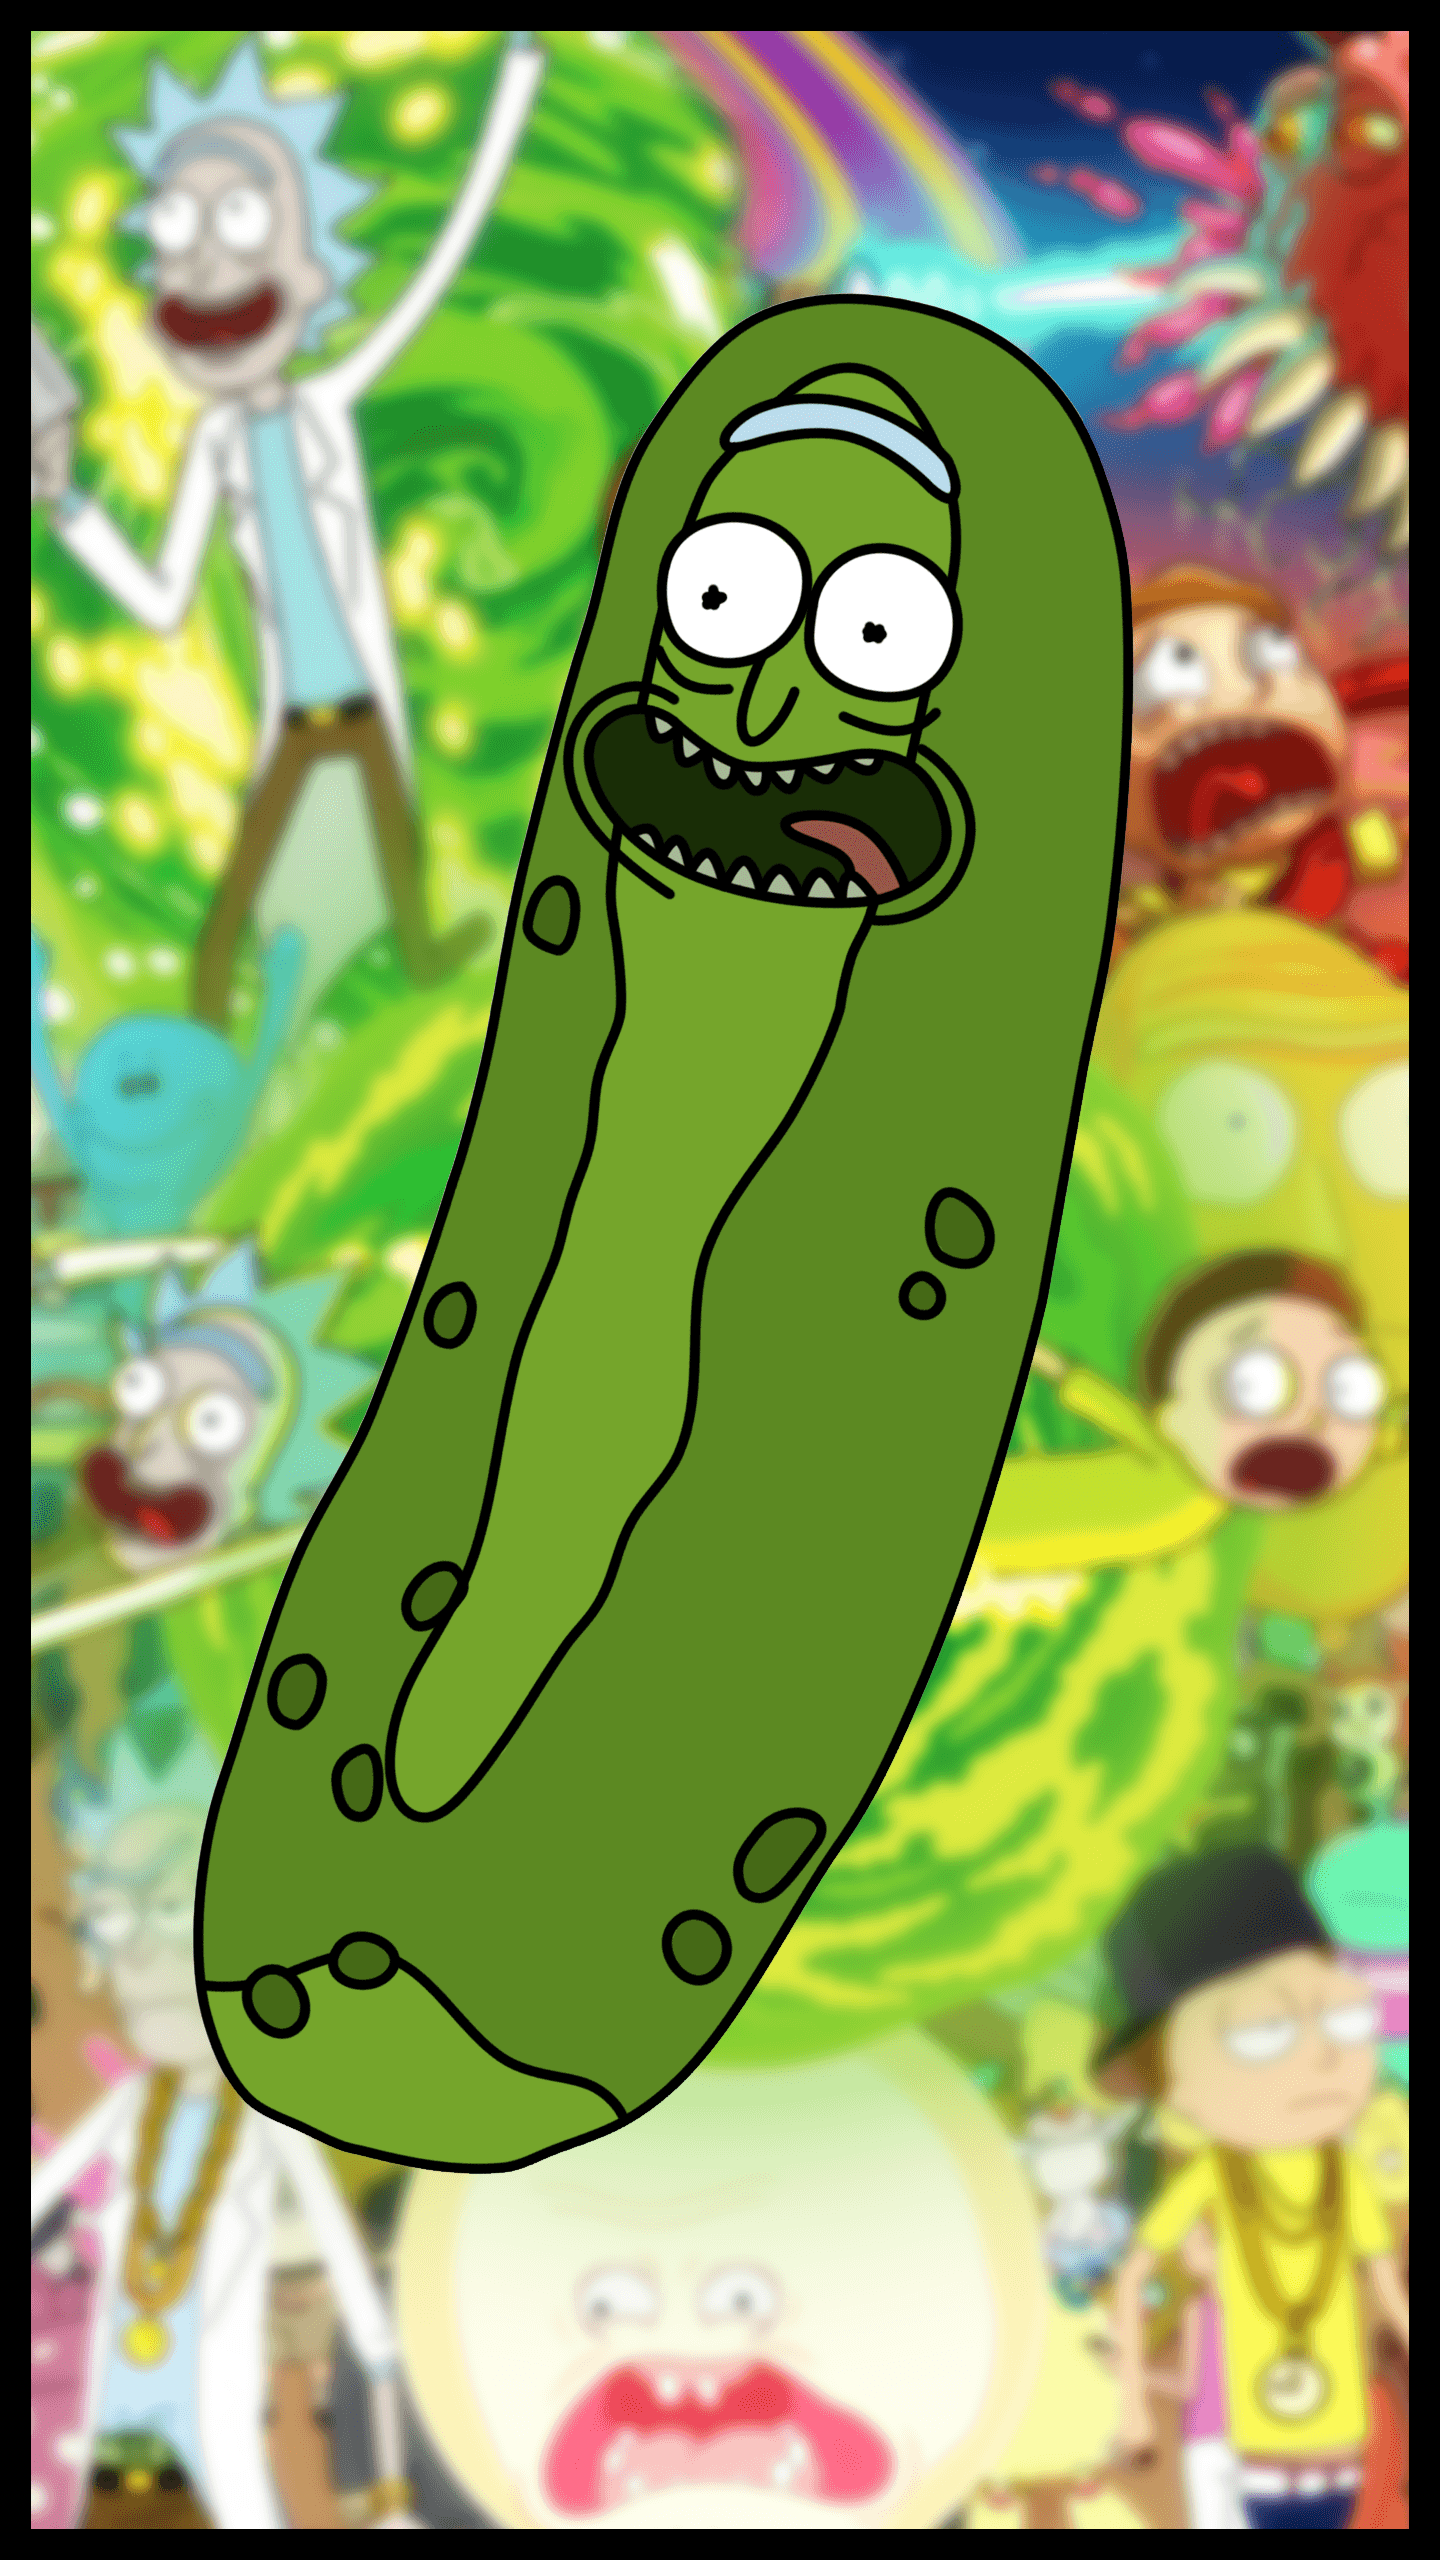 Did a Pickle Rick Phone Wallpaper. Thought it belongs here